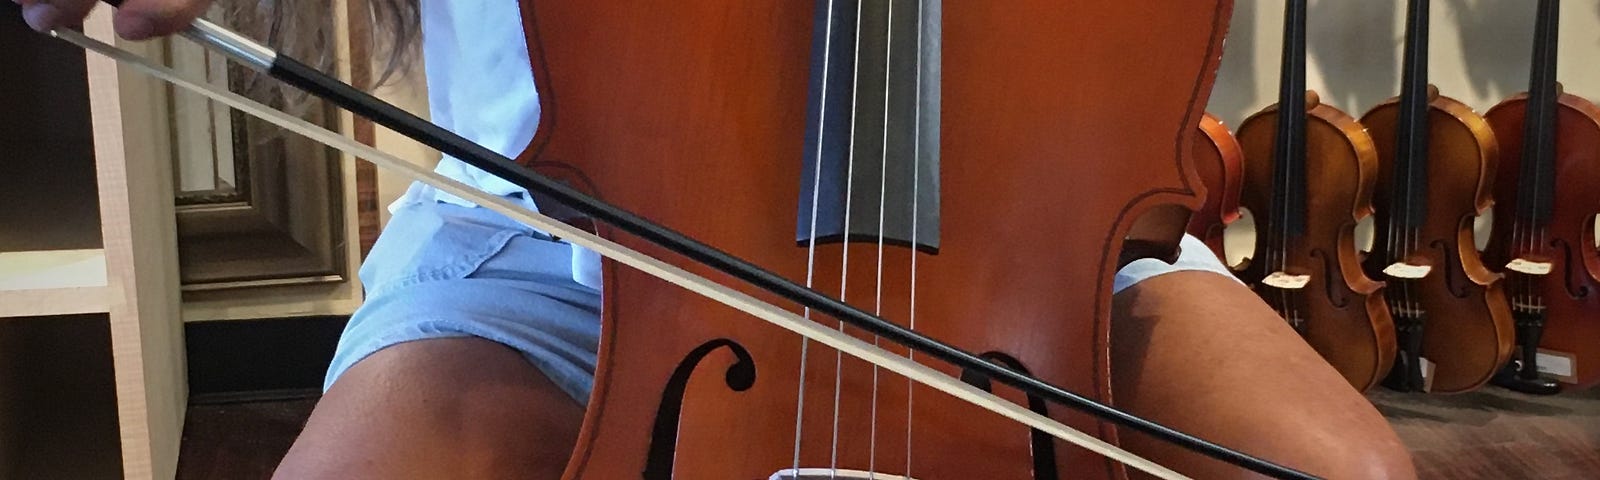 A close up color photo of a cello being played, cropped to show the instrument’s finger board and bowing hand of the musician.